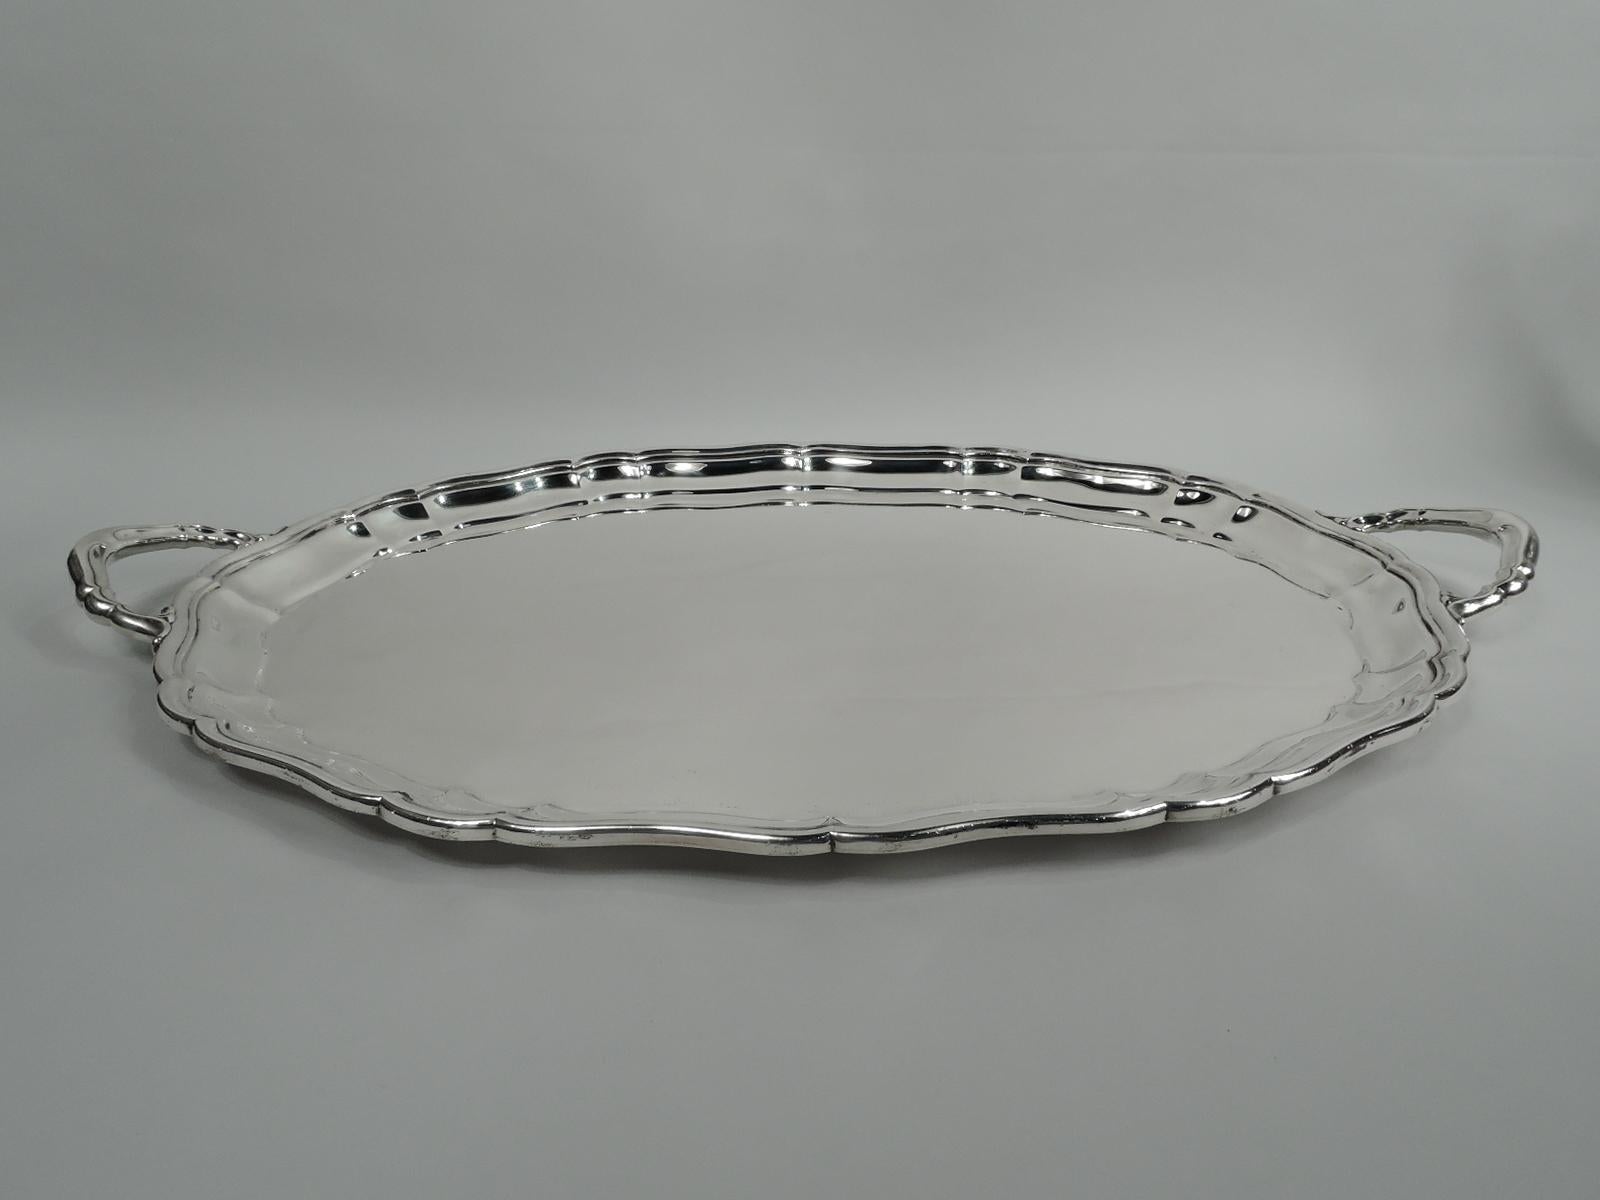 Large and old-fashioned American sterling silver tea tray, 1954. Retailed by Cartier in New York. Oval well and scrolled sides and rim; end bracket handles. Fully marked including retailer’s stamp, Gorham date code, and no. 207. Heavy weight: 132